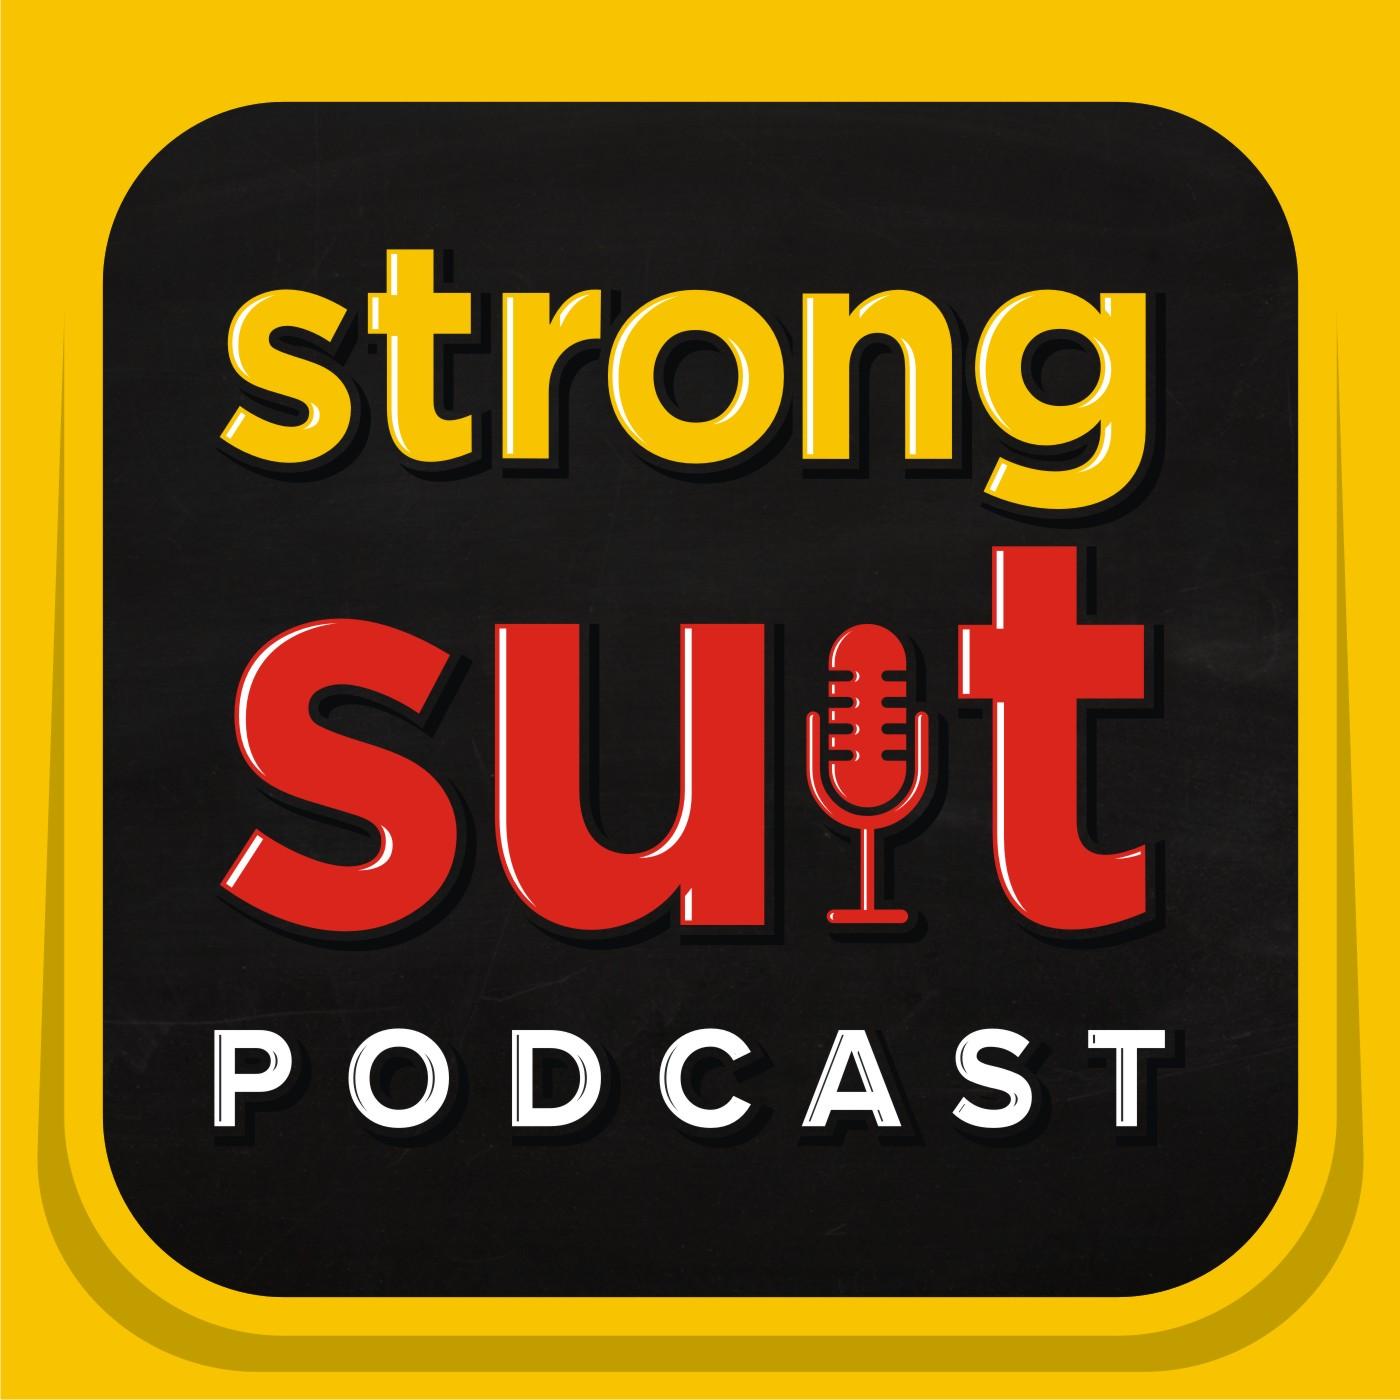 Red Suit Logo - Strong Suit Podcast logo - Strong Suit